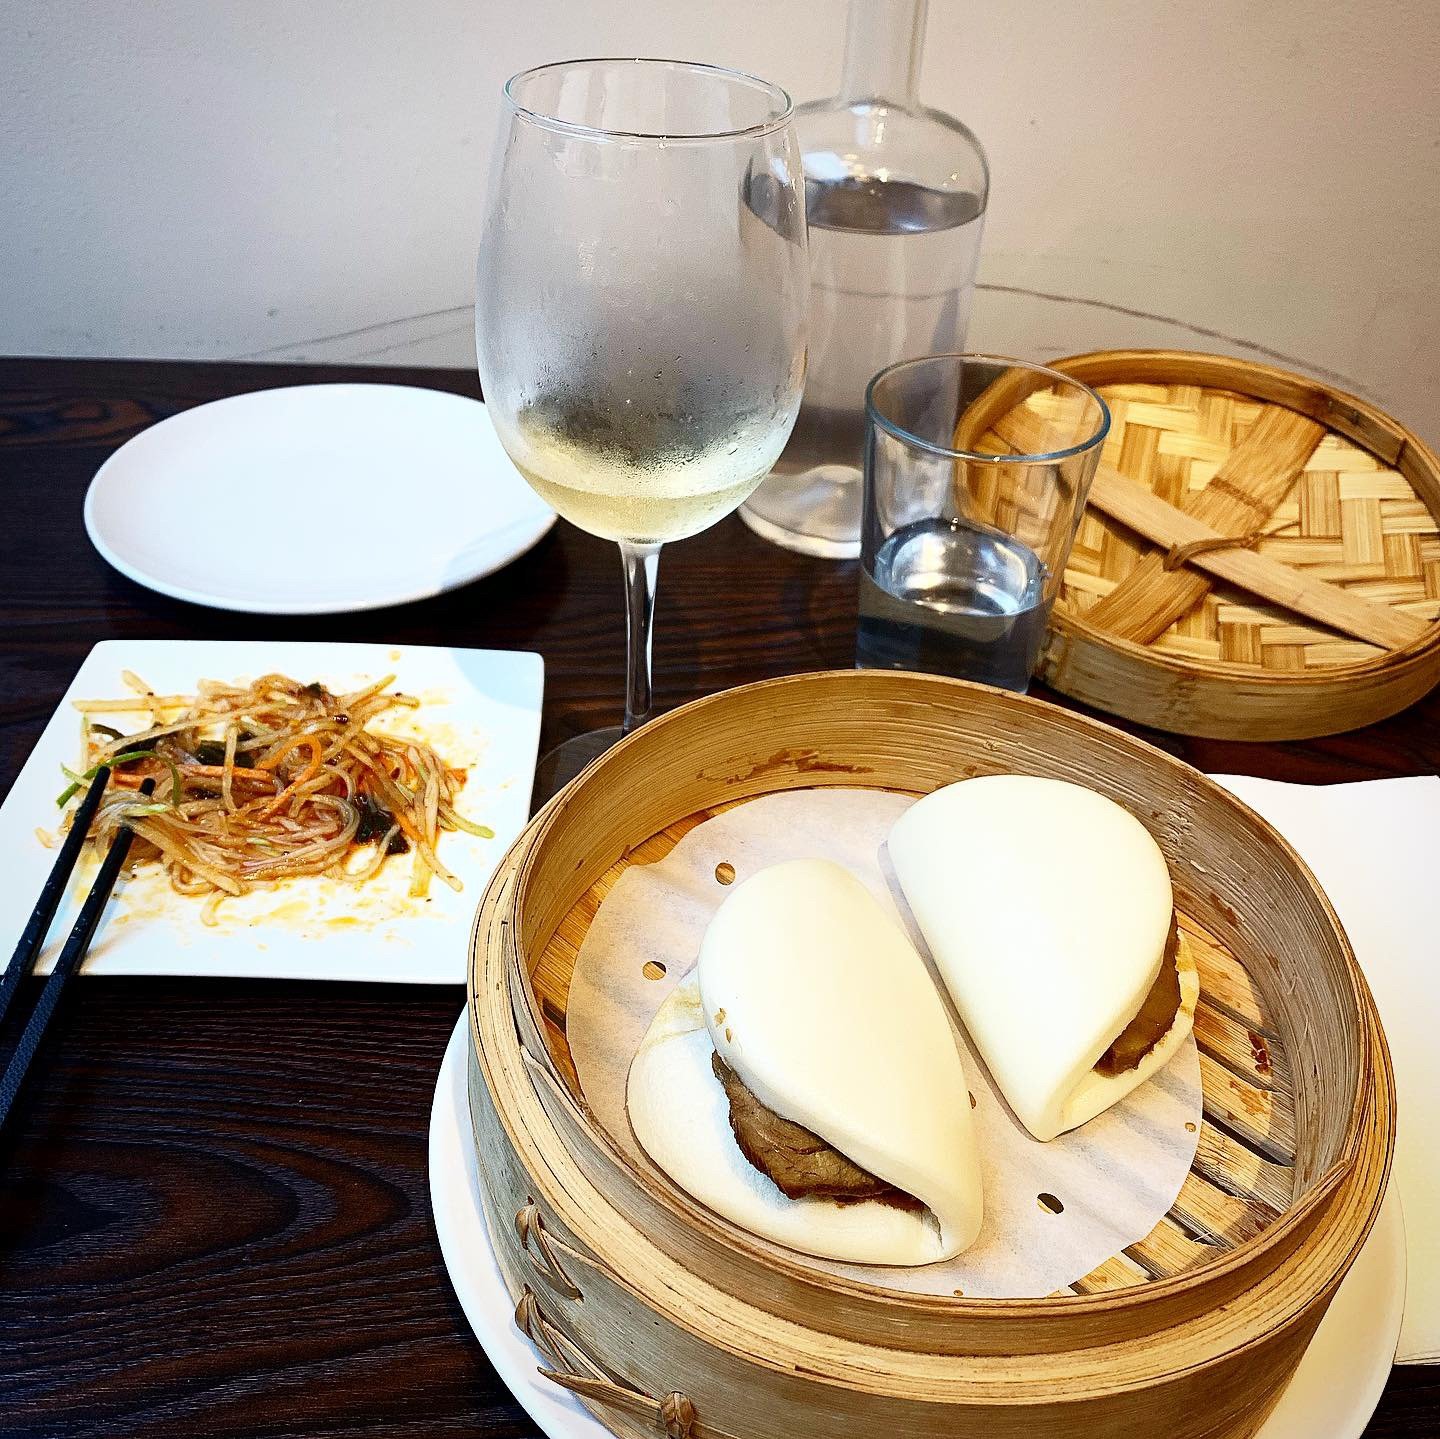 $5 happy hour items at Sichuan Kitchen